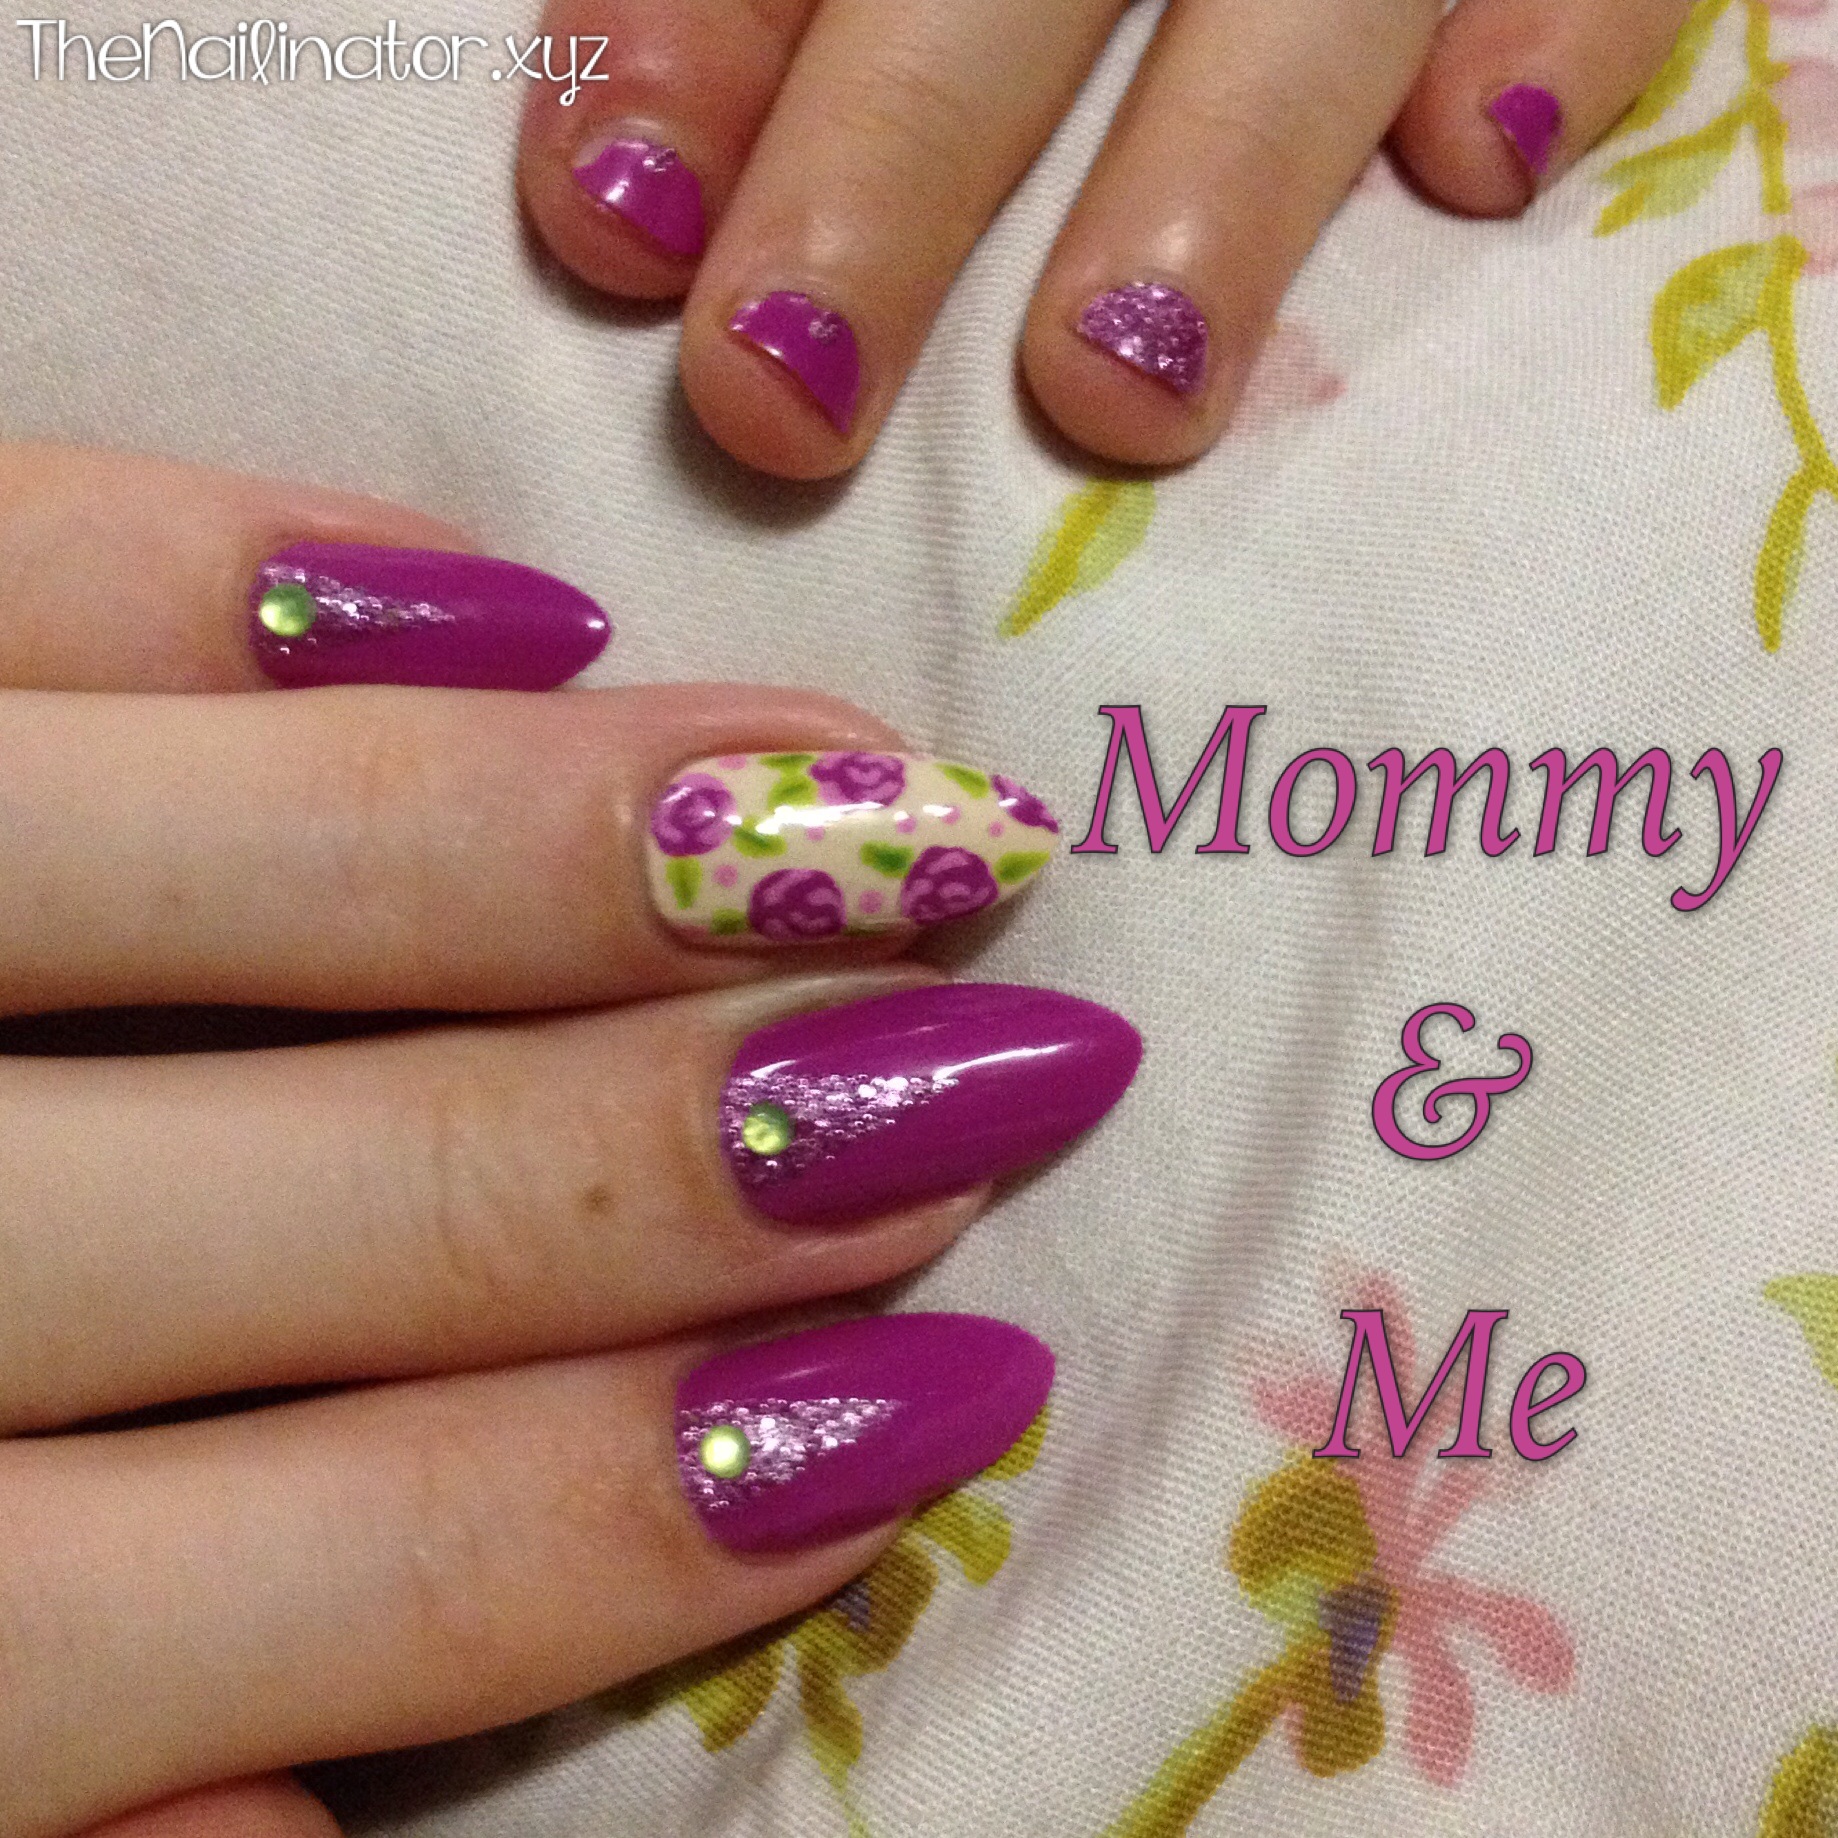 Mommy & Me manicure featuring Girlstuff Forever polishes